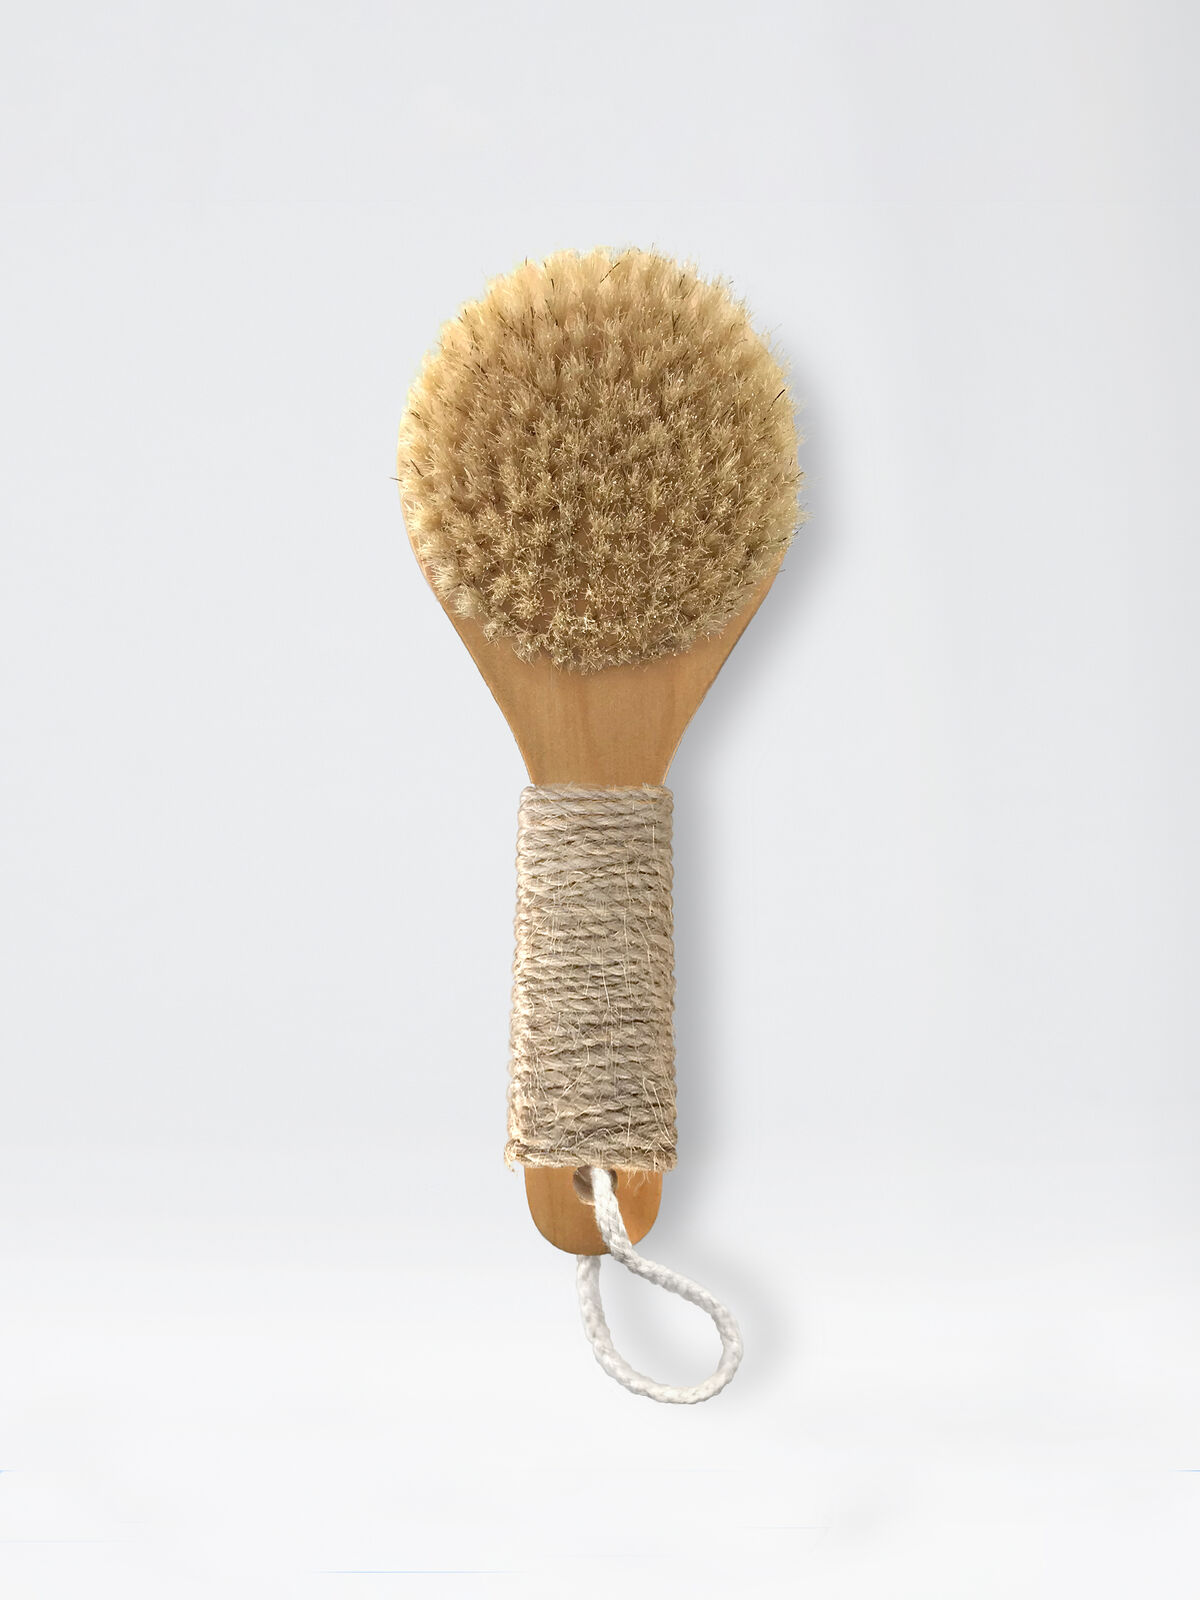 Esker - Dry Brush With Twine